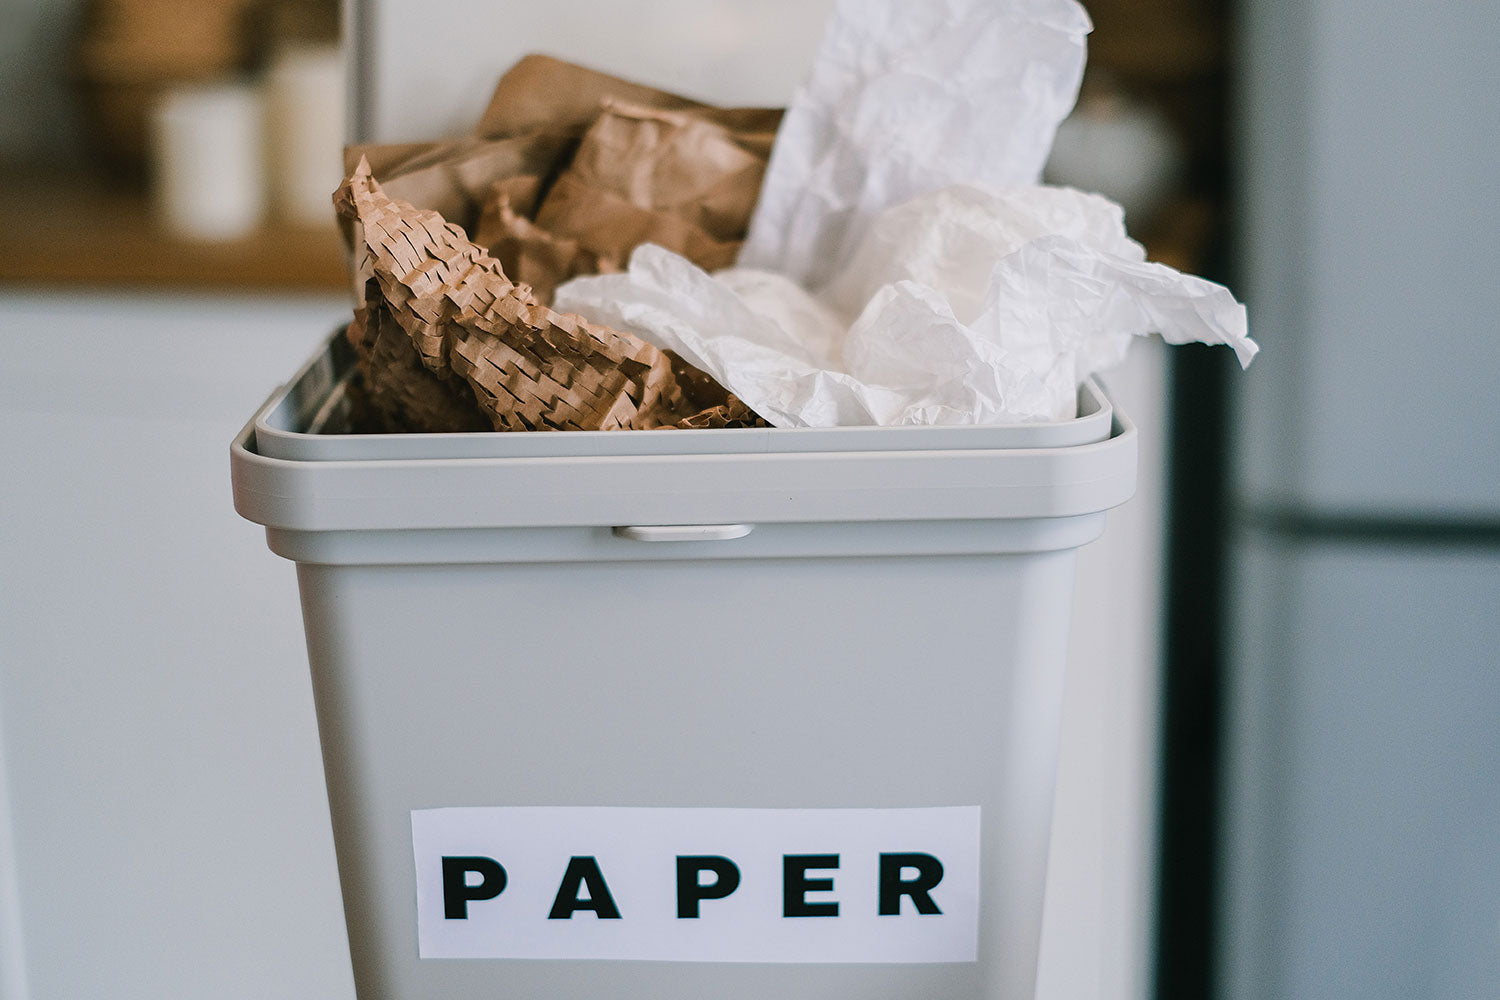 Recycling Paper